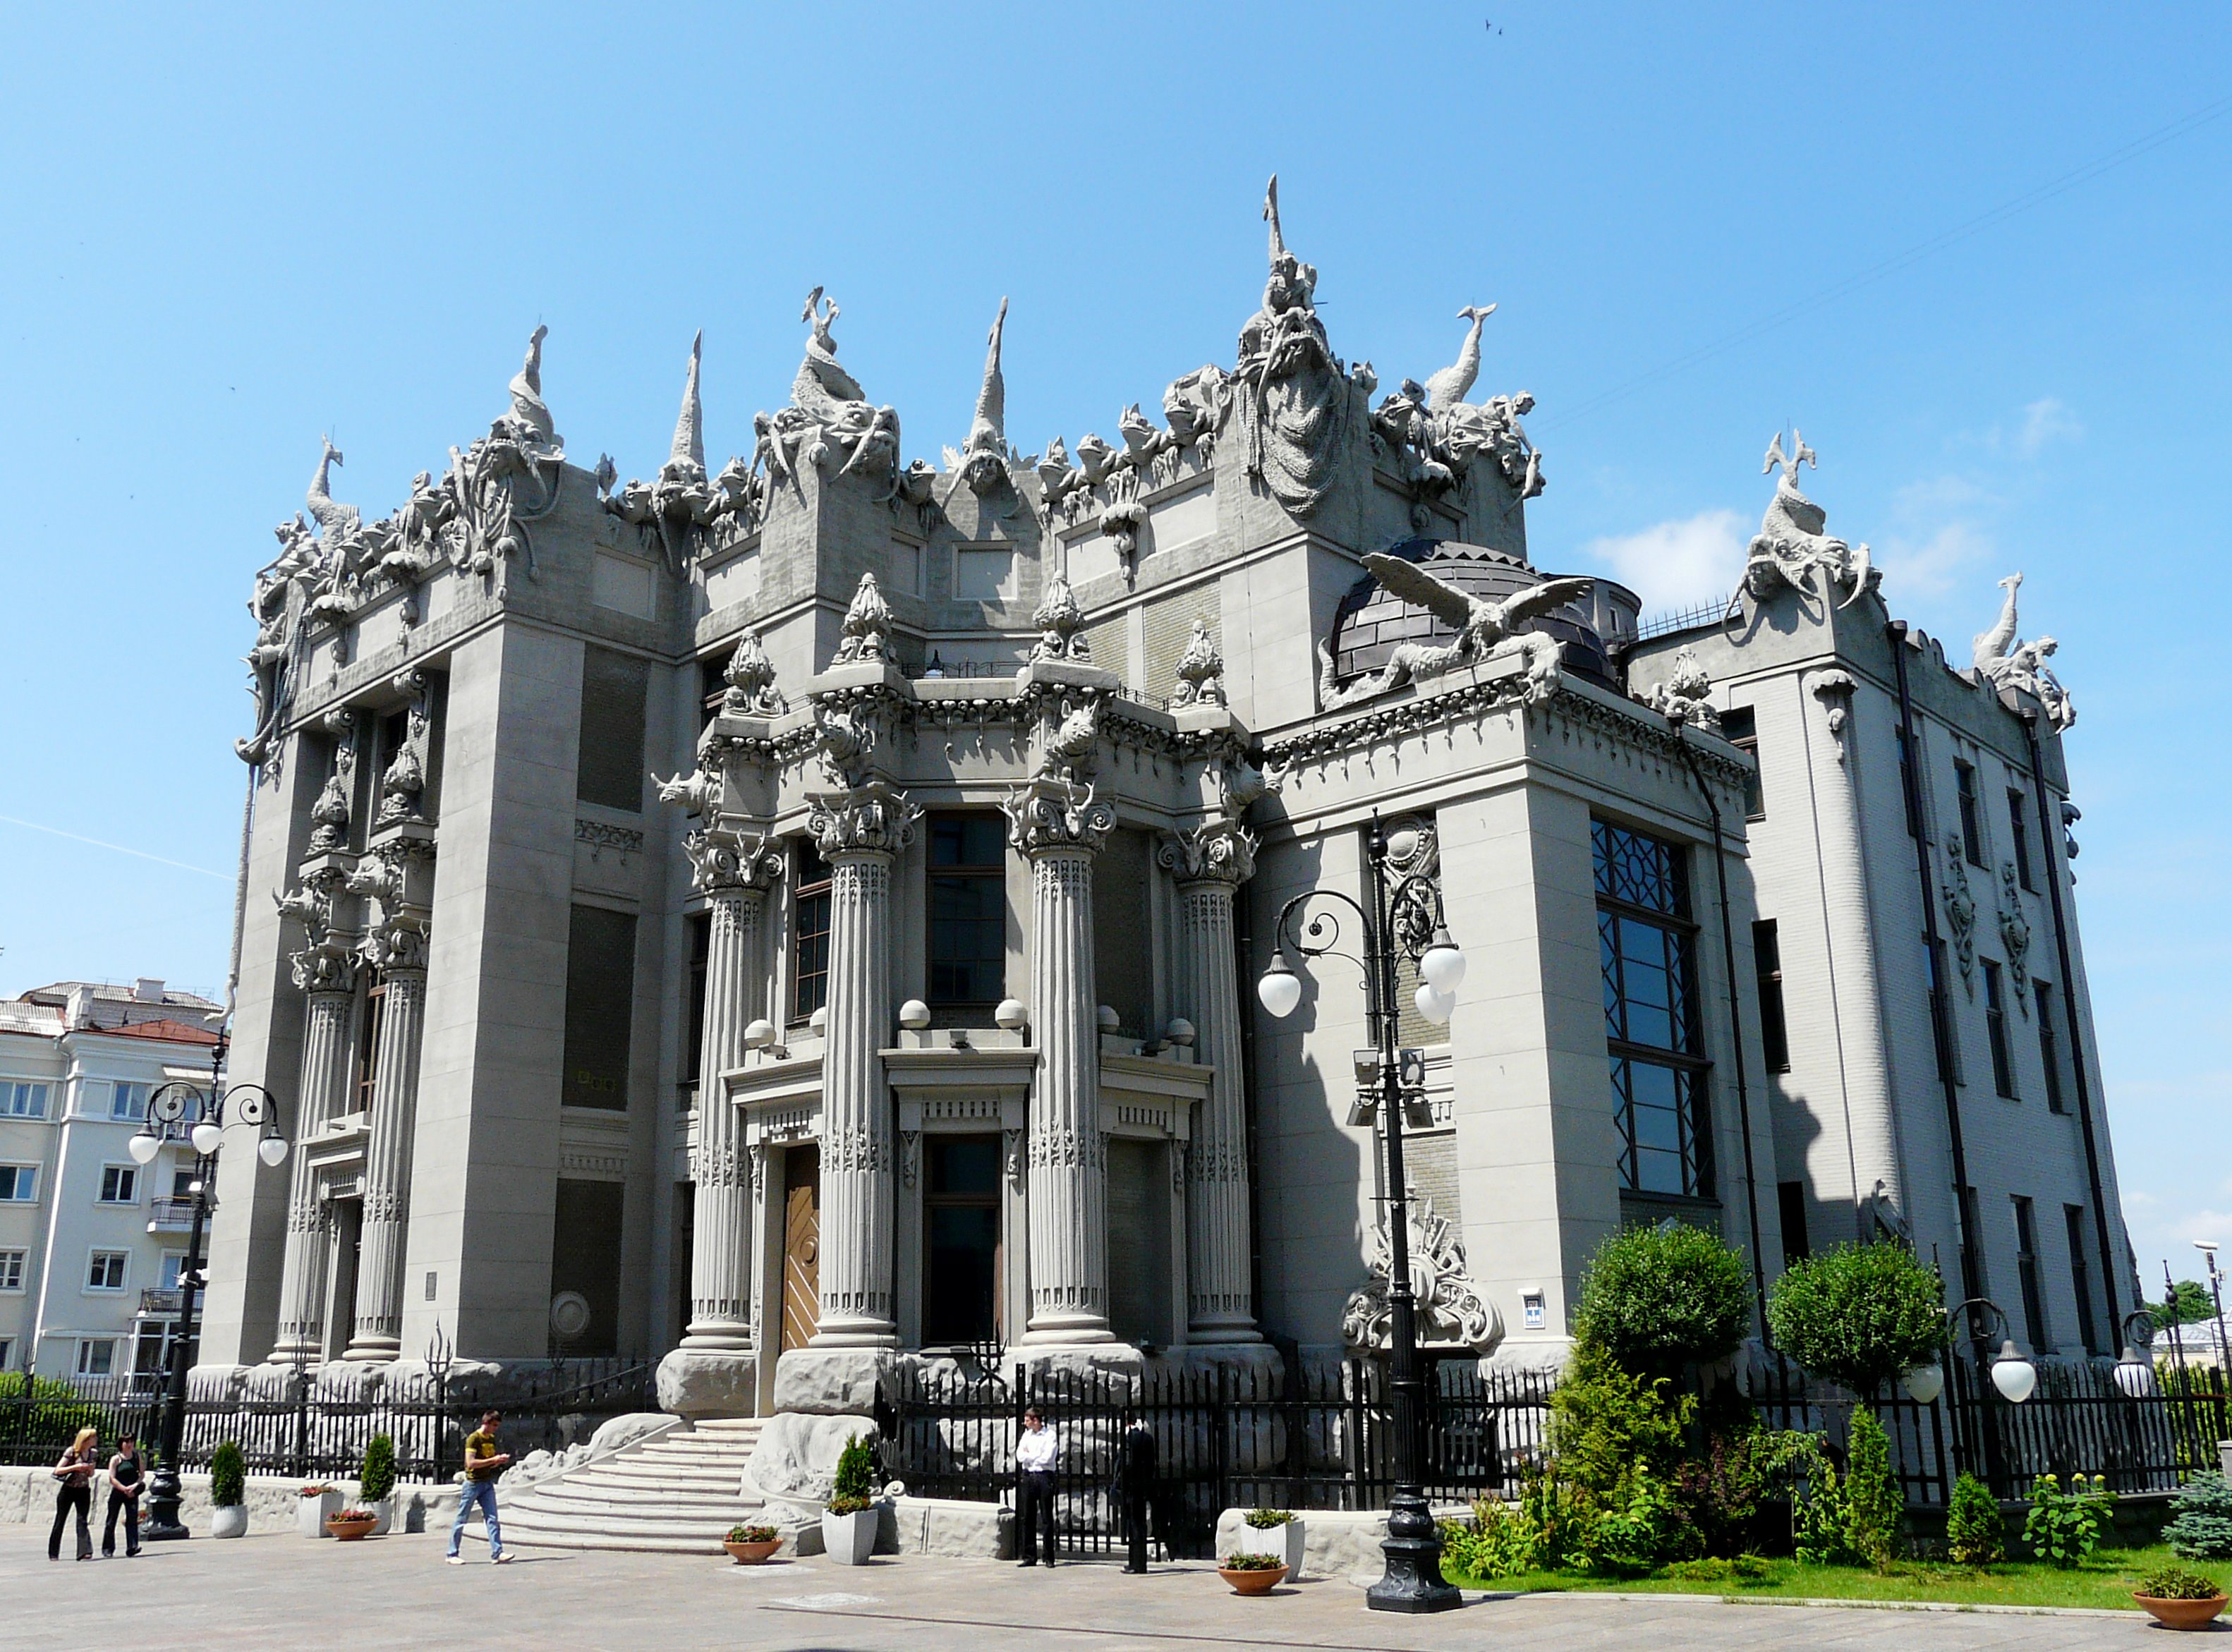 The front façade of the House with Chimaeras in Kyiv, Ukraine.